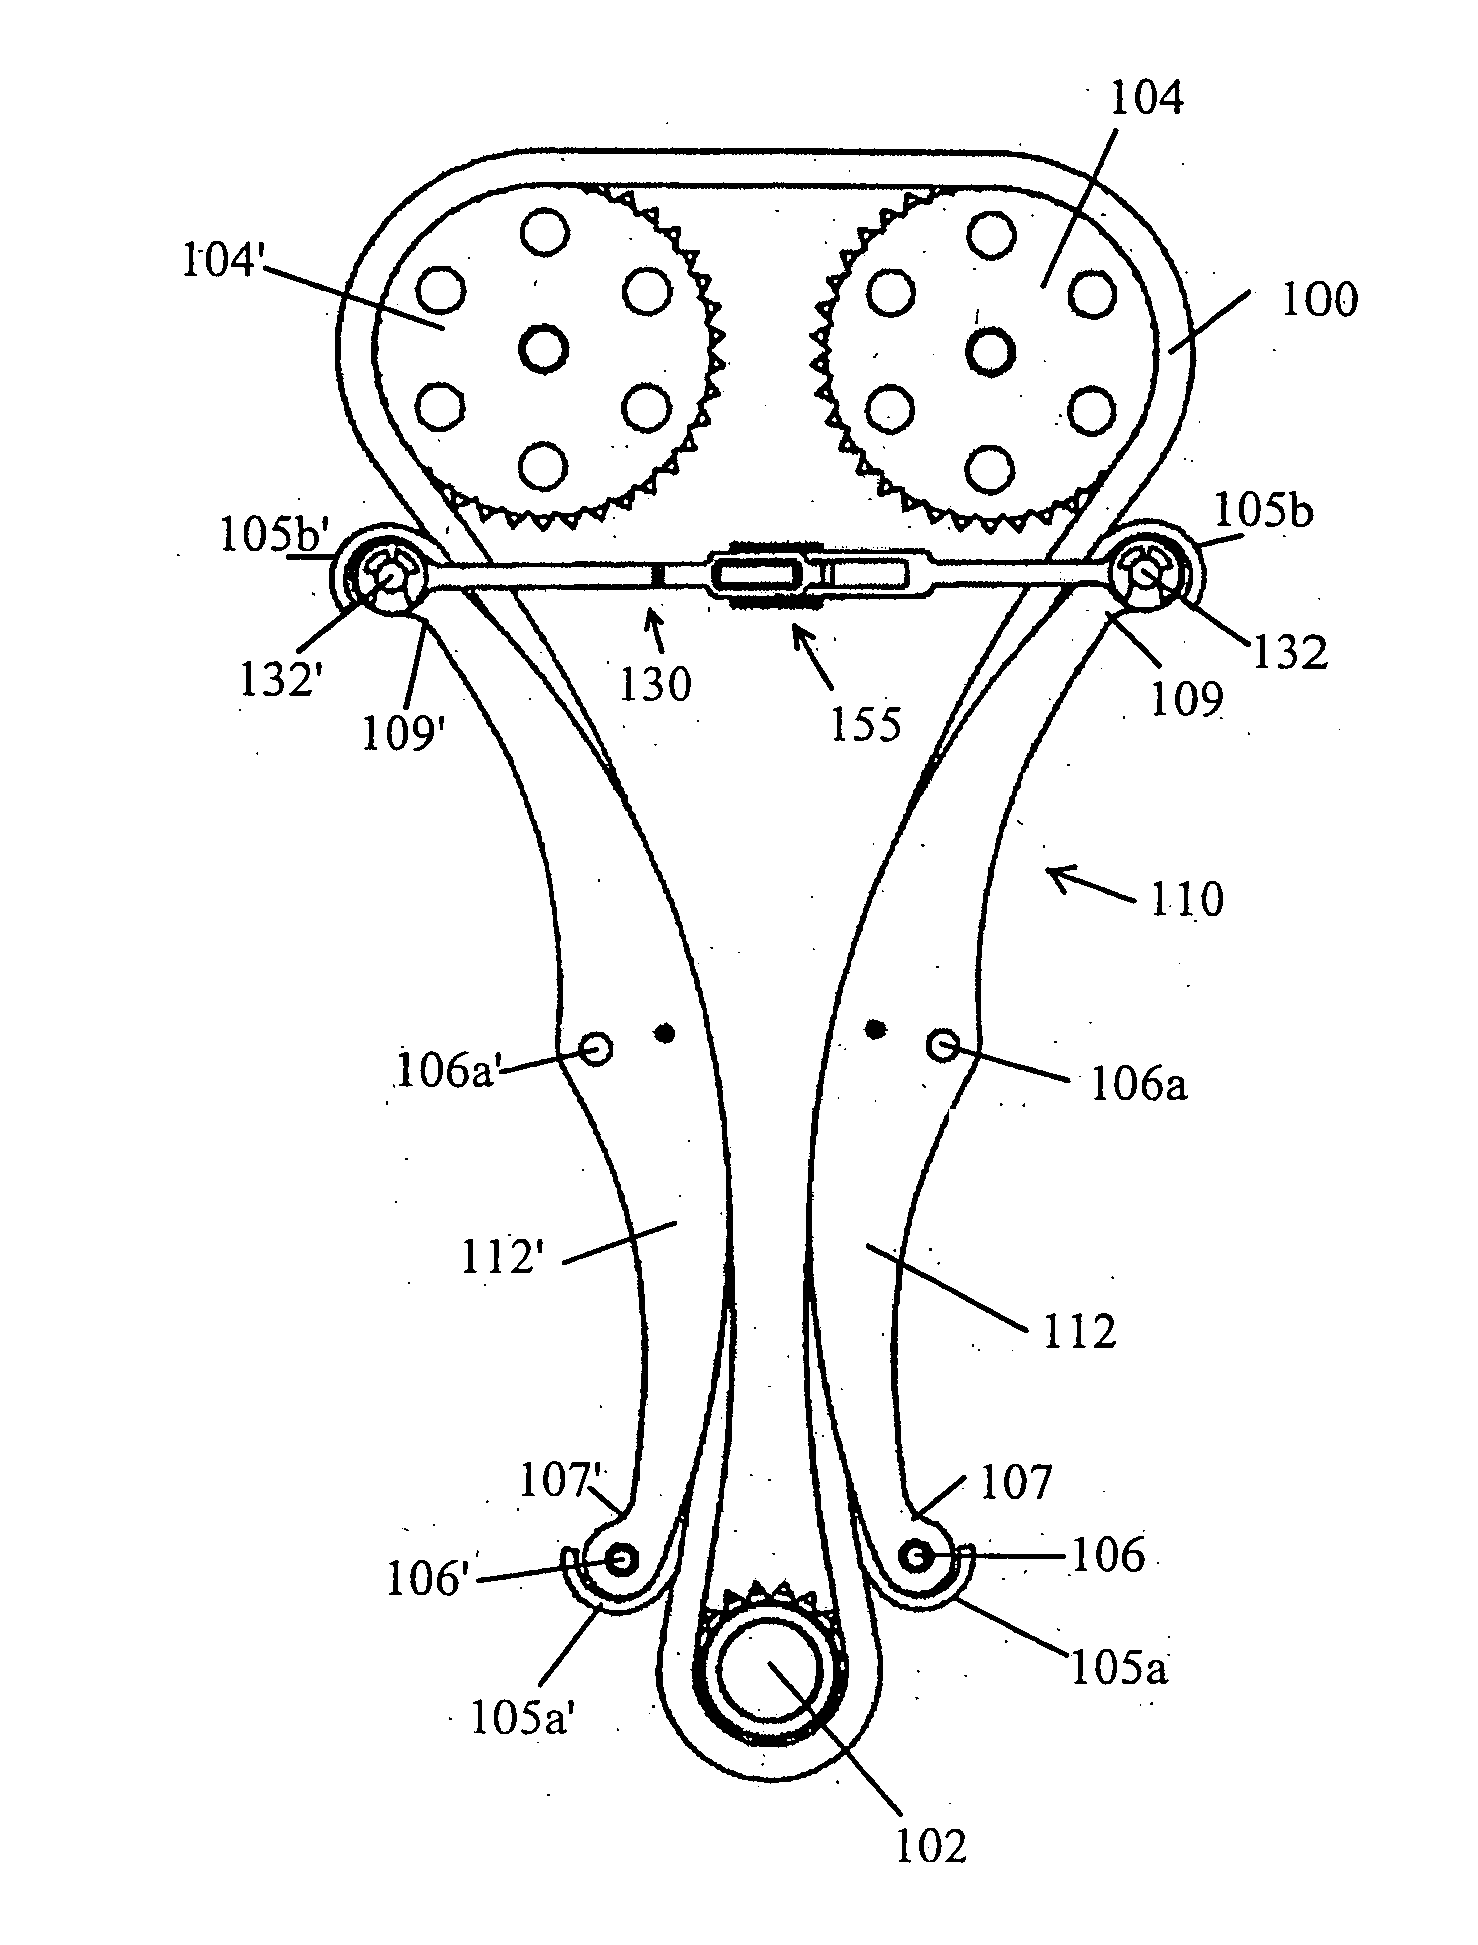 Mechanical strap tensioner for multi-strand tensioning